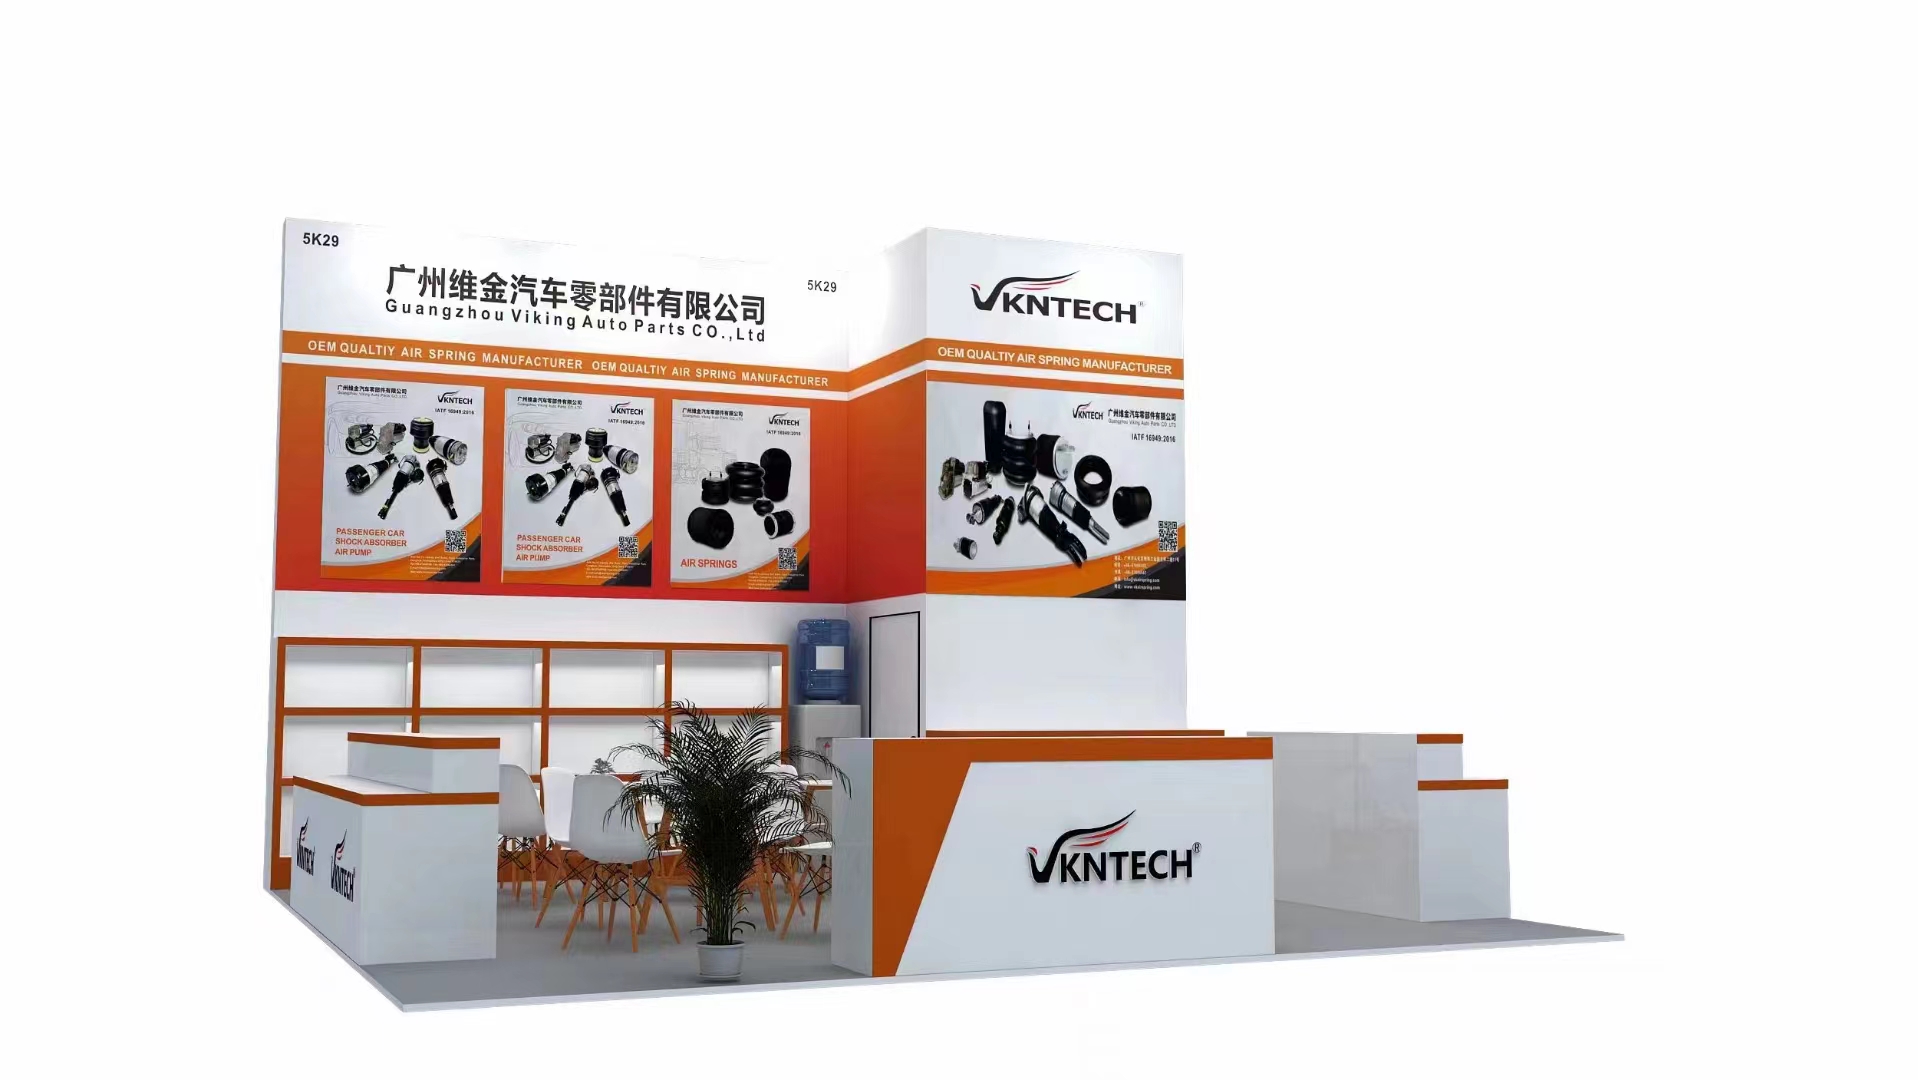 Meet With you at Automechanika Shenzhen Exhibition, Feb 15-18 2023!